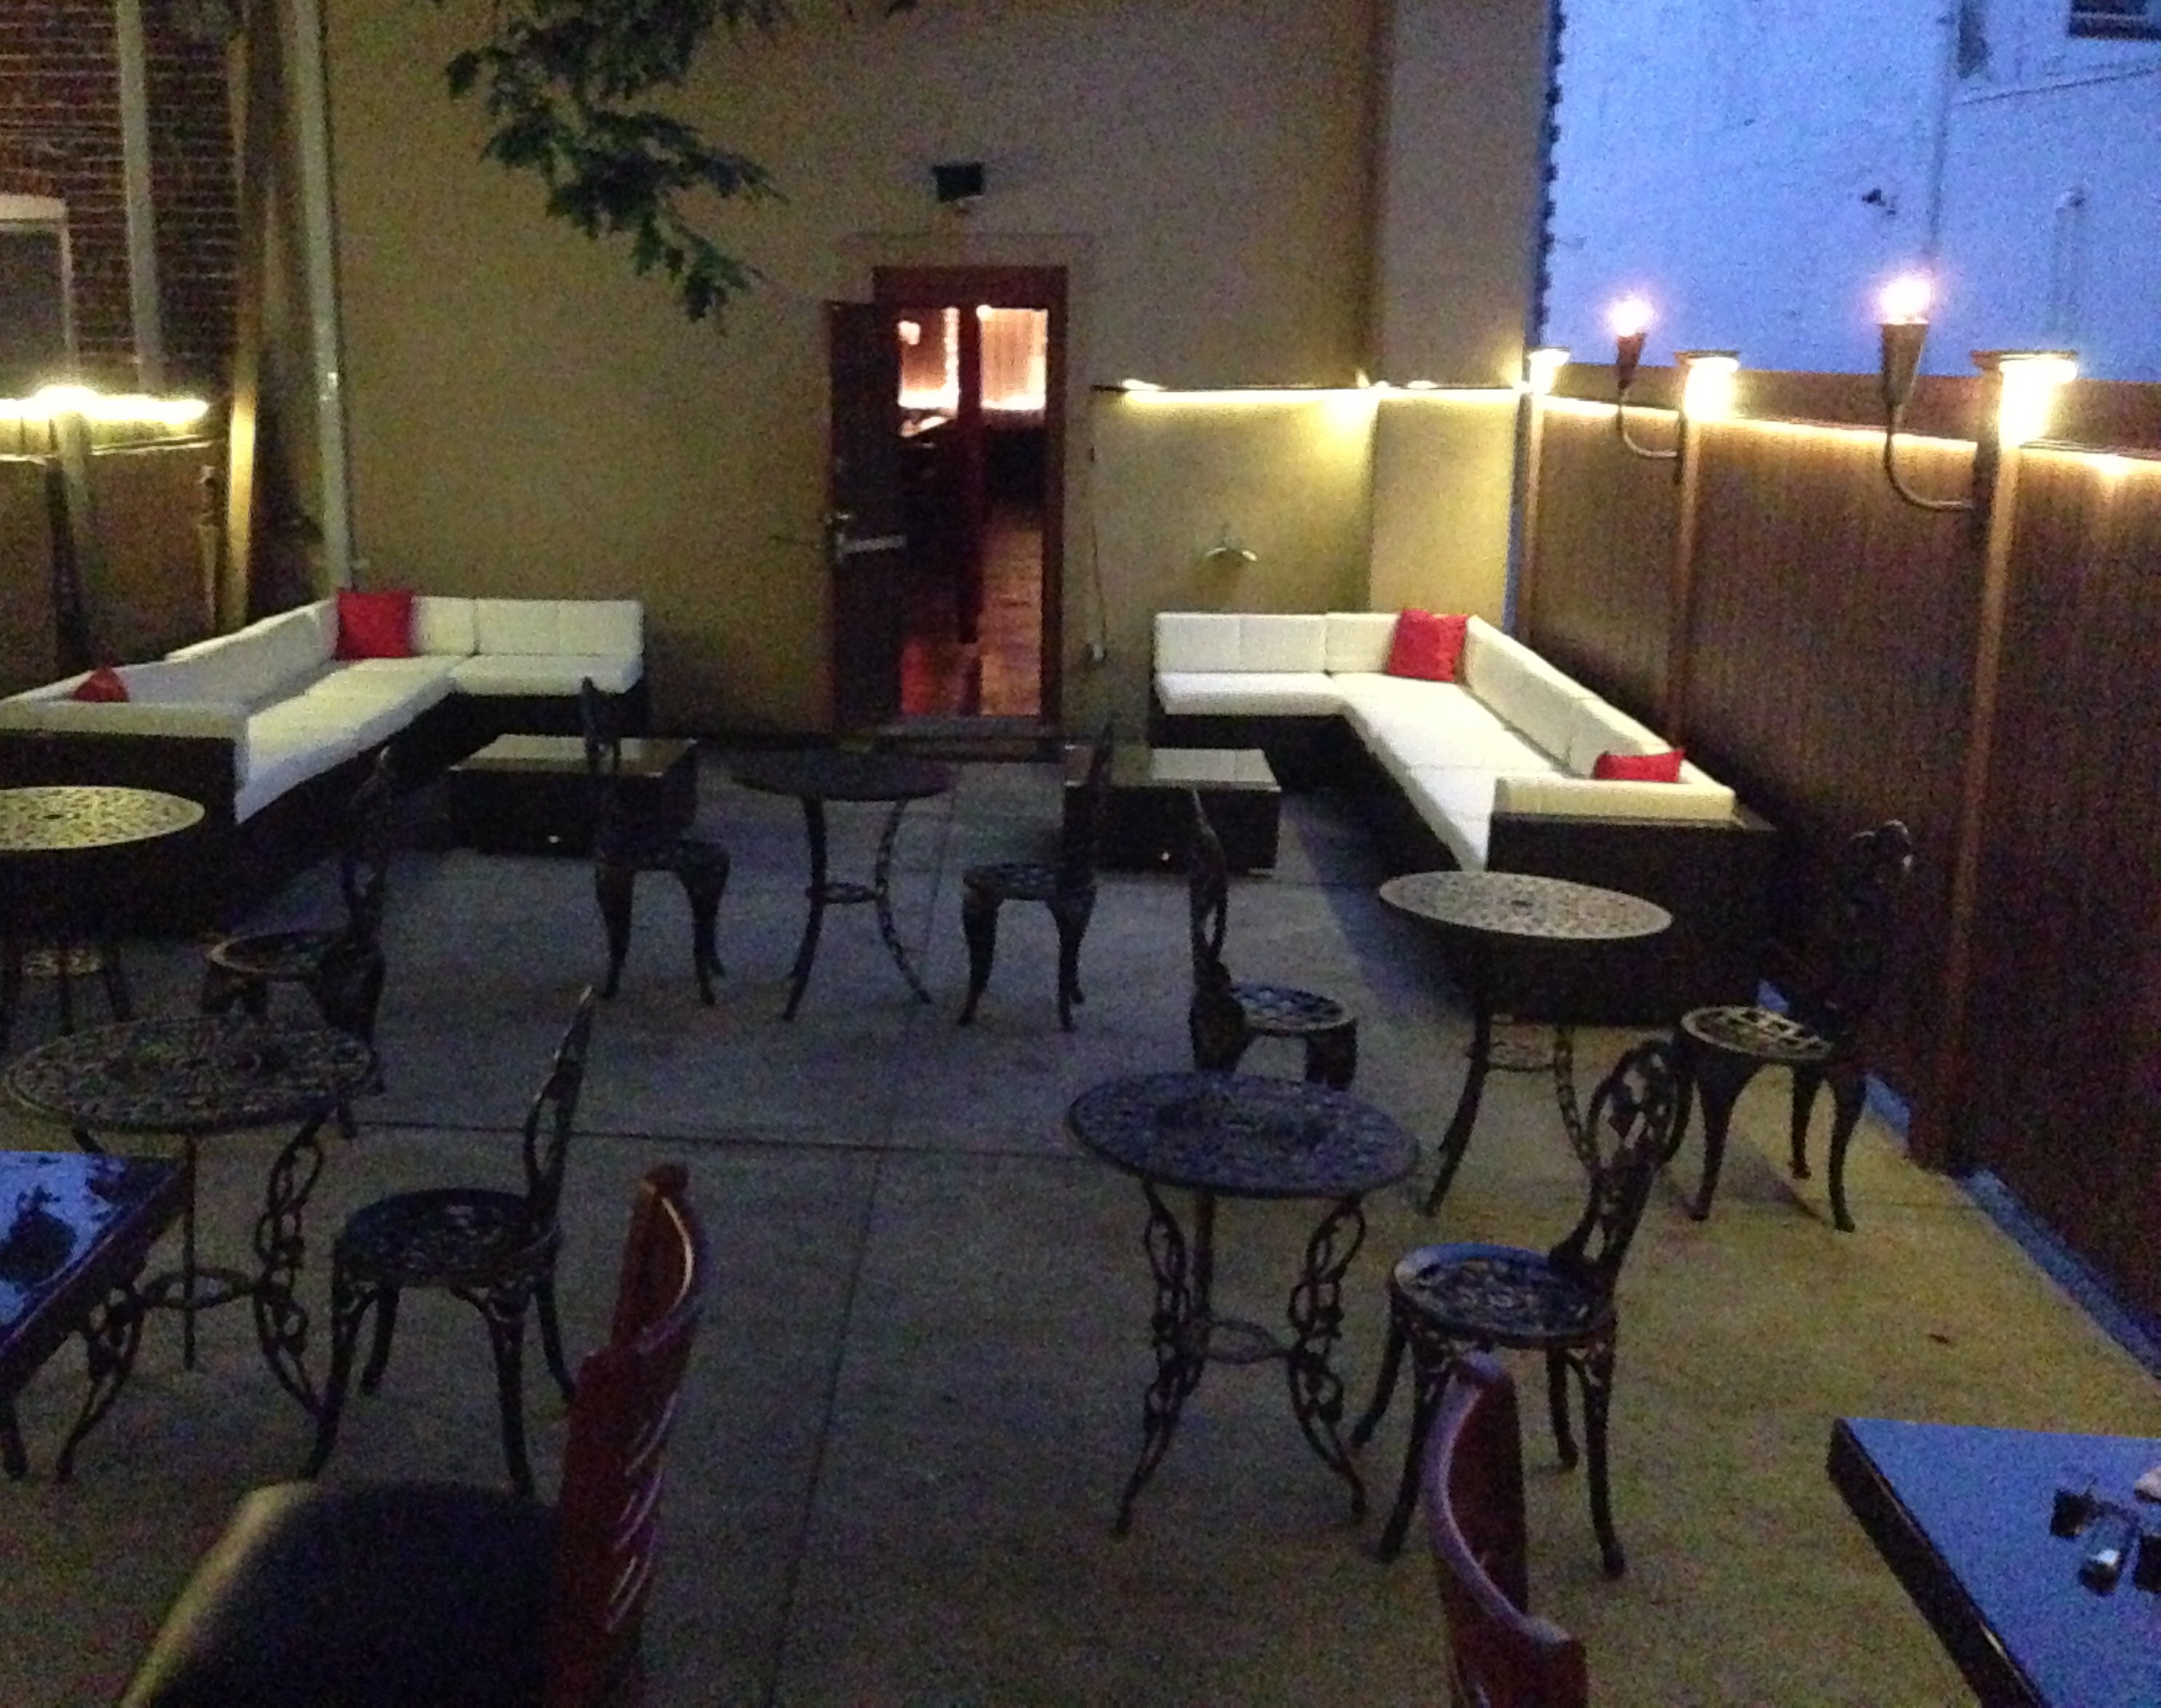 Le Caire Lounge Hookah Bar Outdoor Seating Patio Beer Garden Backyard Best Birthday Bachelor Bachelorette Parties Bars Long Island NY